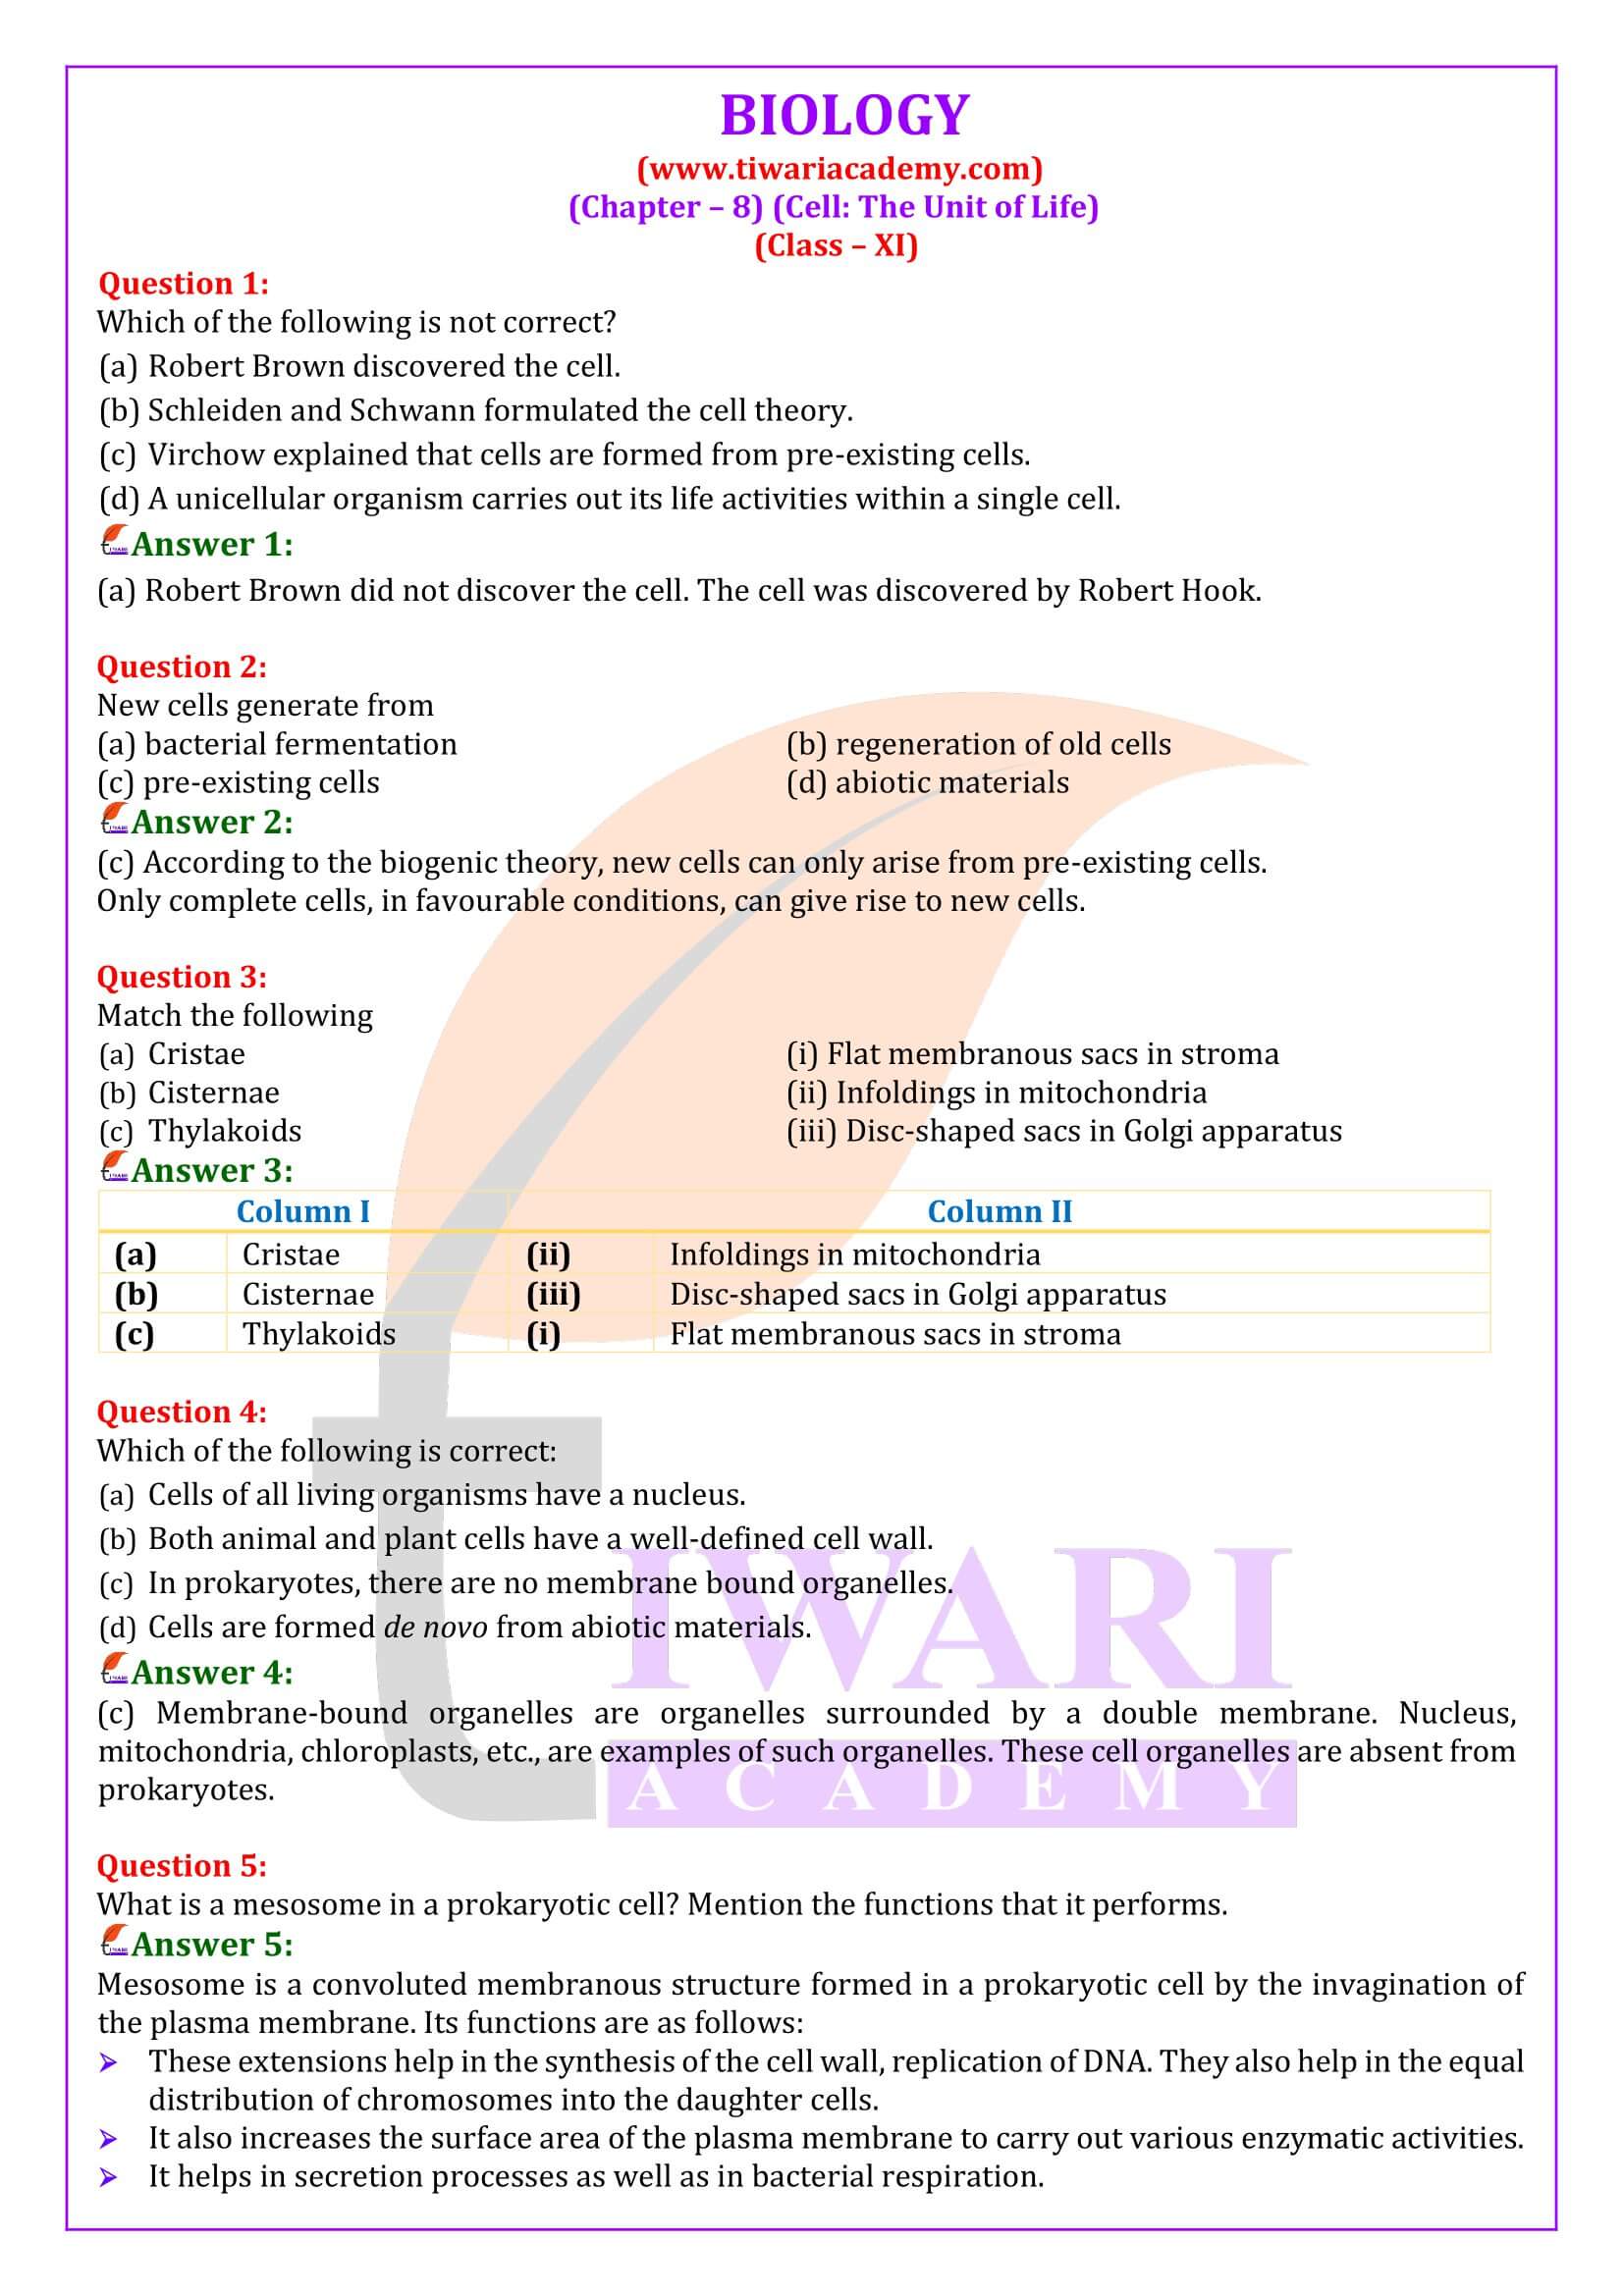 NCERT Solutions for Class 11 Biology Chapter 8 in English Medium